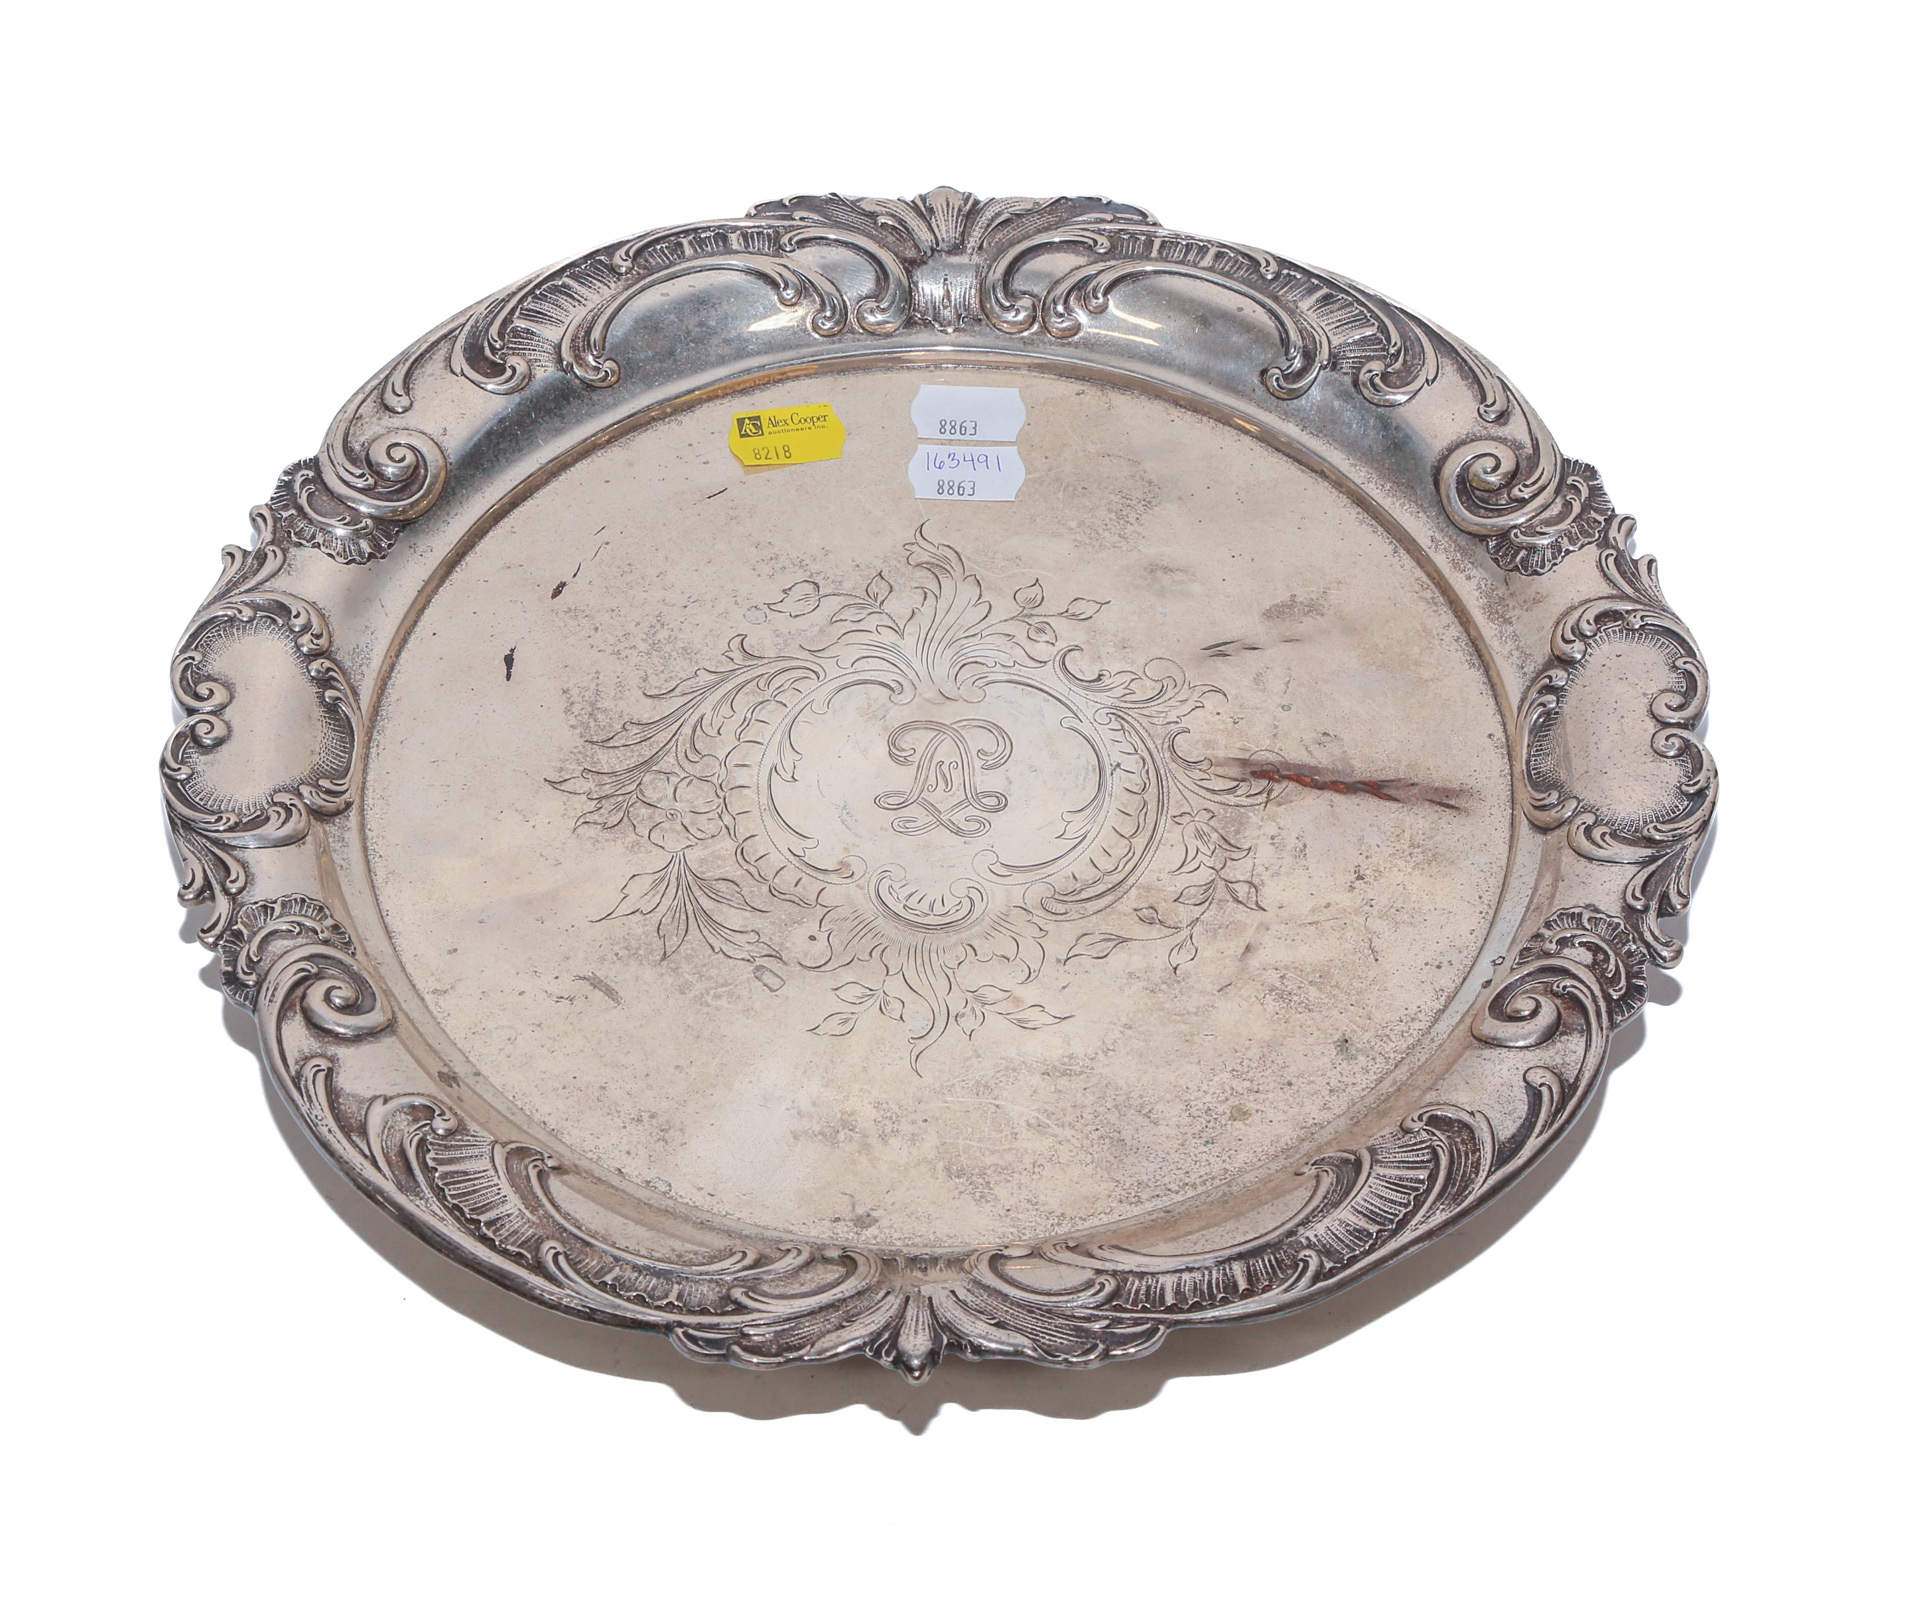 STERLING SILVER PLATTER Centered with